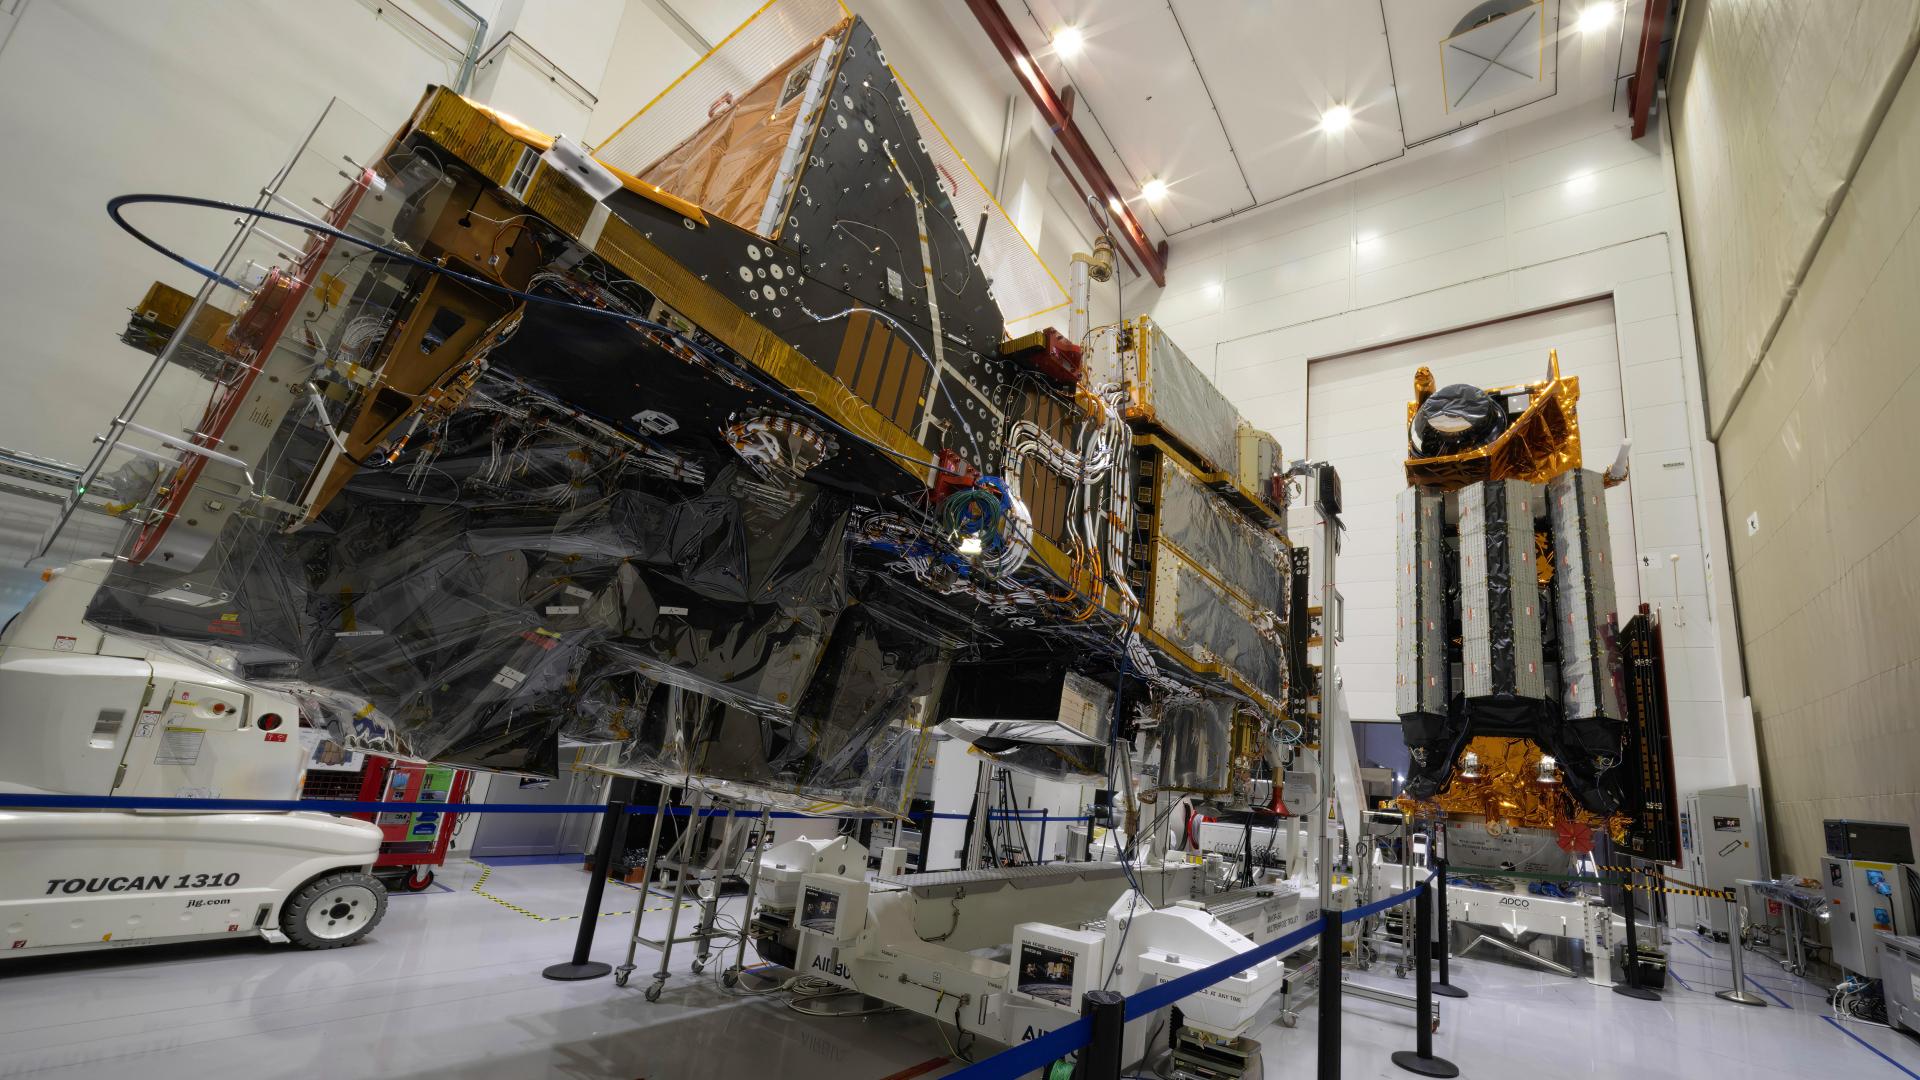 MetOp-SG satellites in the Airbus cleanroom in Toulouse. Photo: ESA / Manuel Pedoussaut